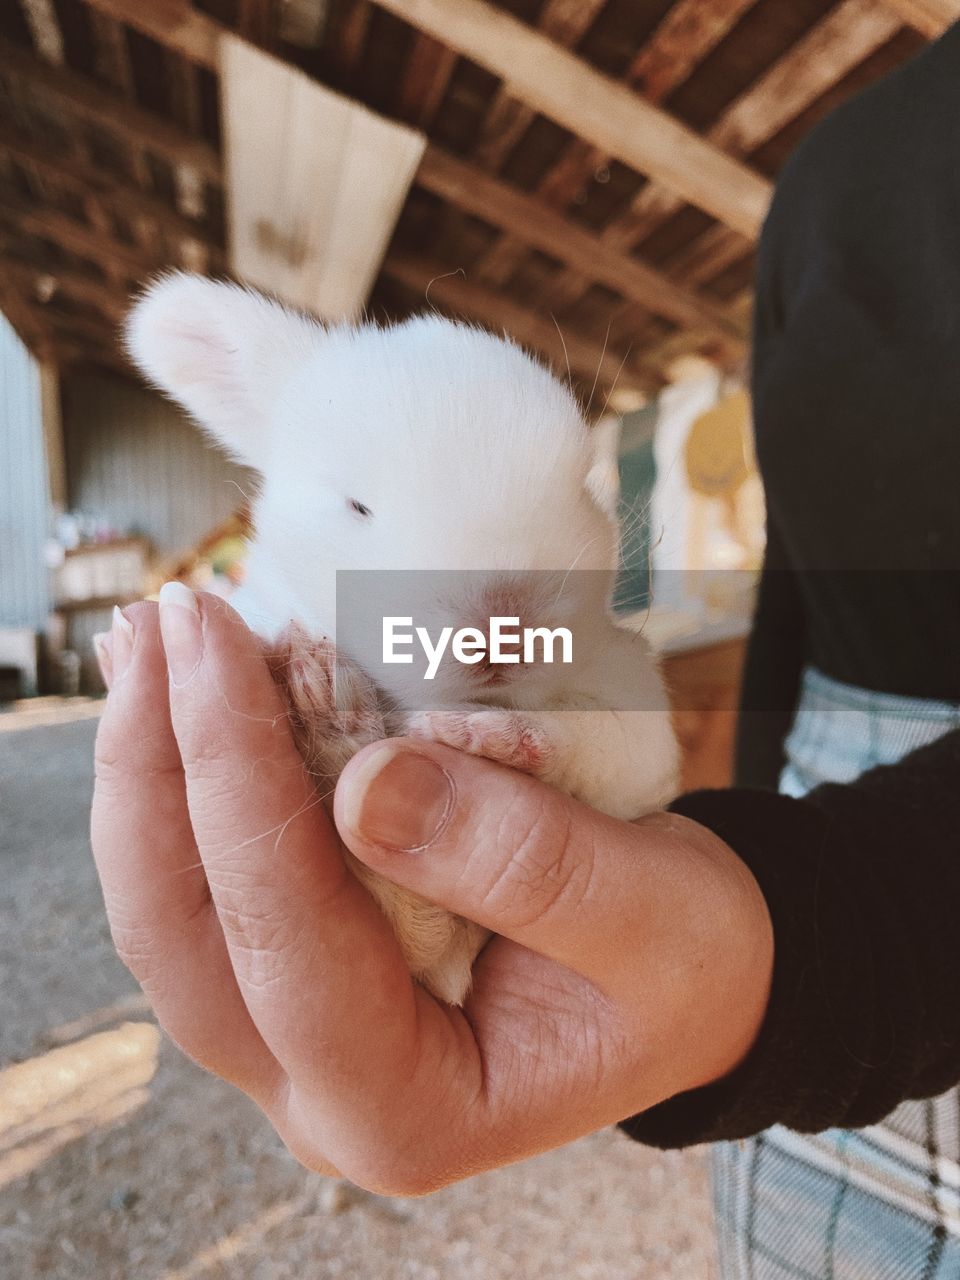 Close-up of hand holding bunny against blurred background